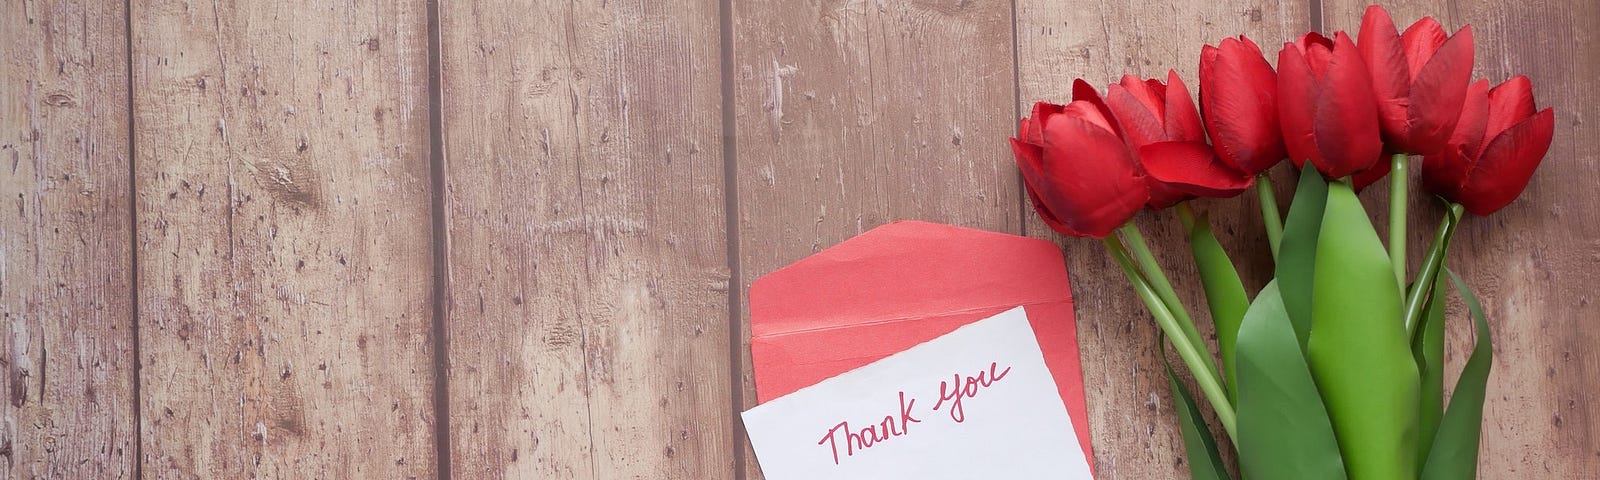 Against a background of wooden boards, a twine-wrapped bundle of red tulips sits beside a small hand-written note that reads “Thank you,” paired with a red envelope.